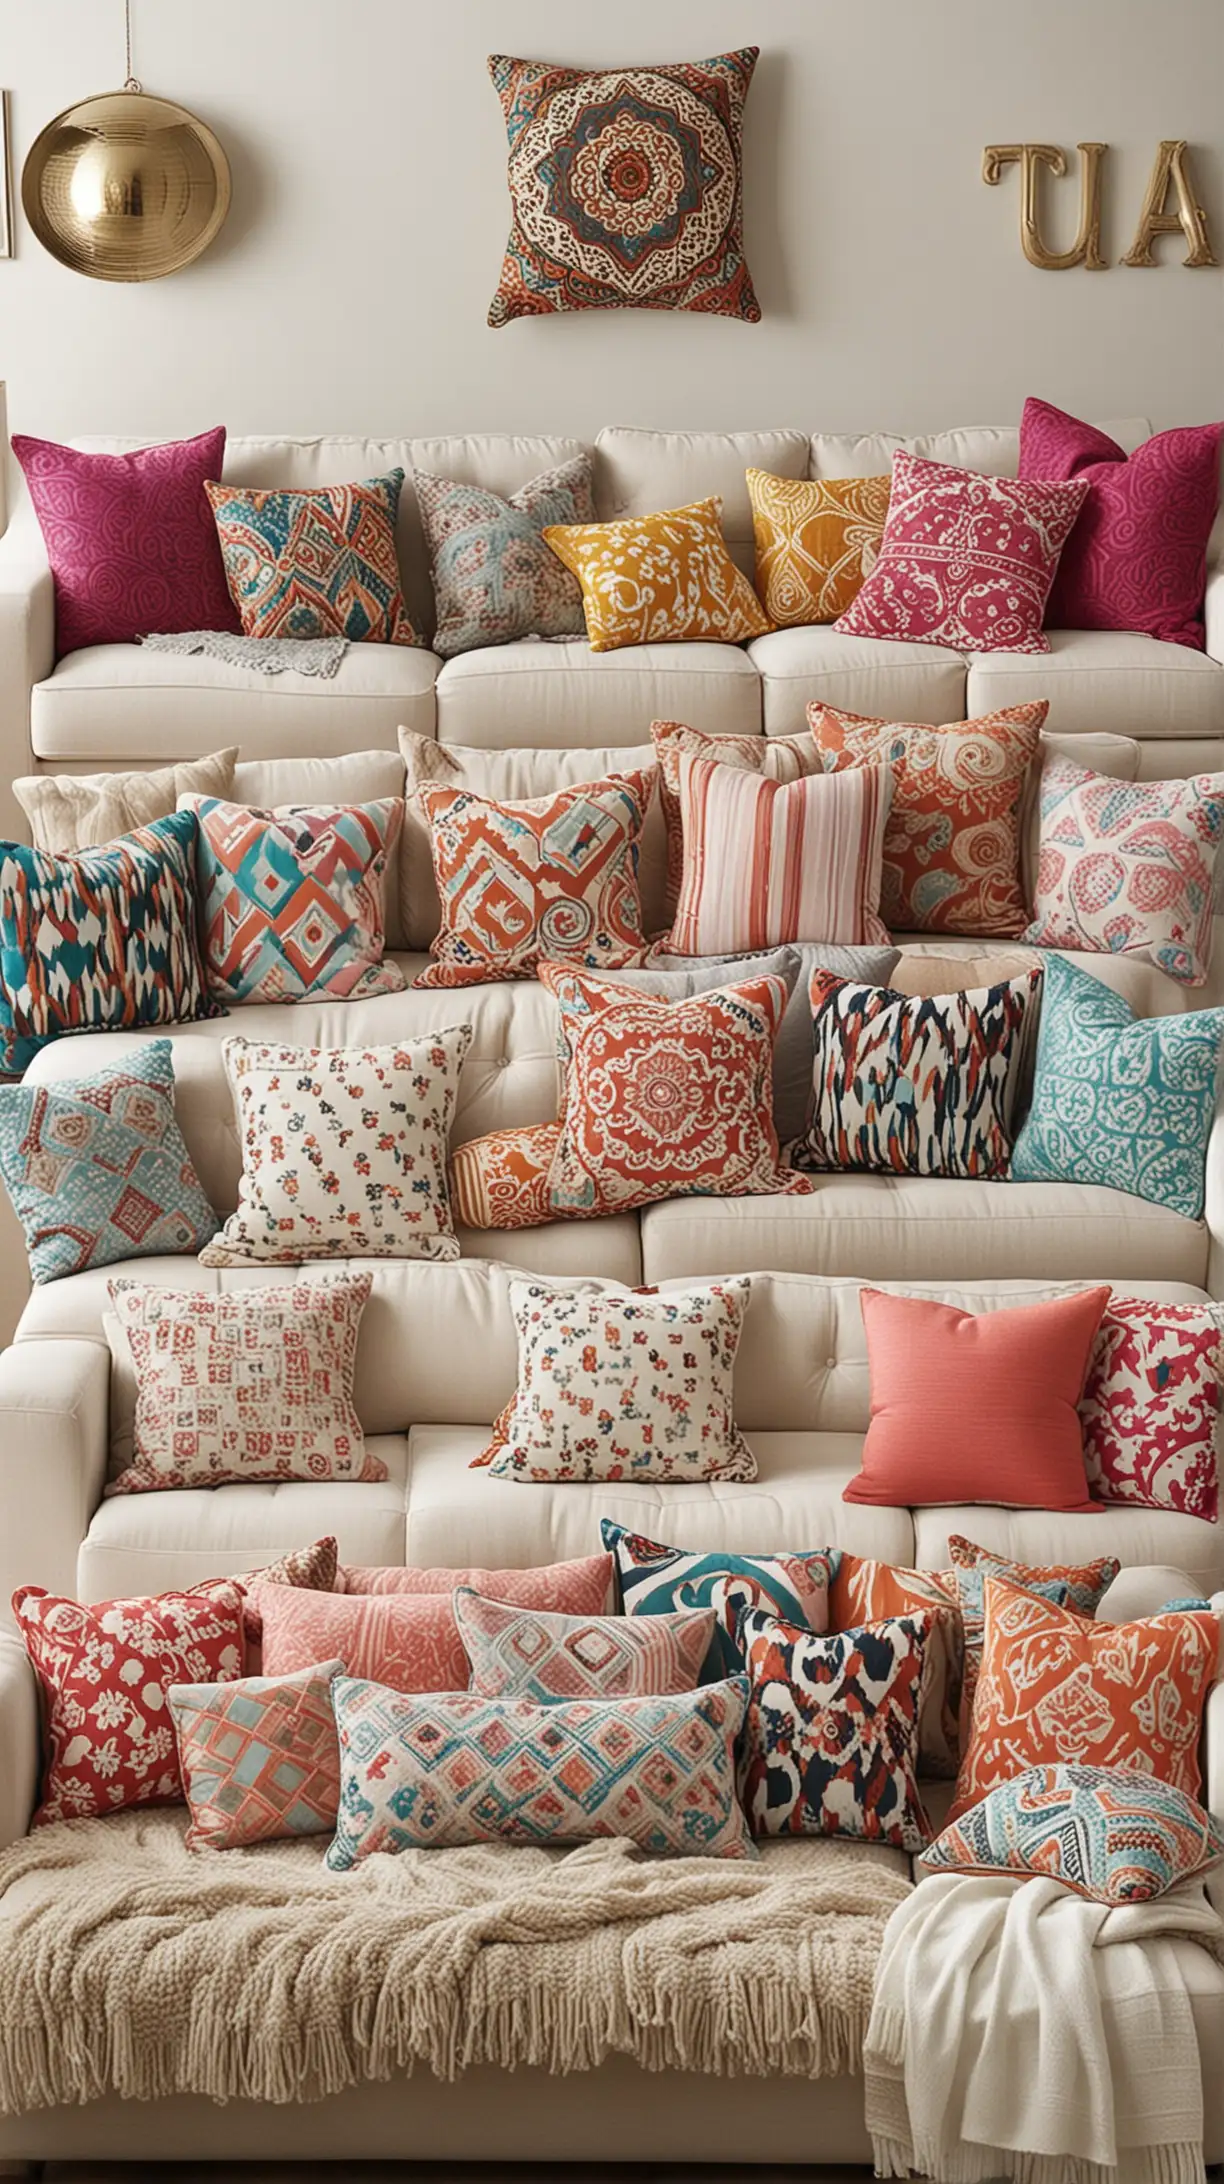 Colorful Throw Pillow Decor in Cozy Living Room Setting